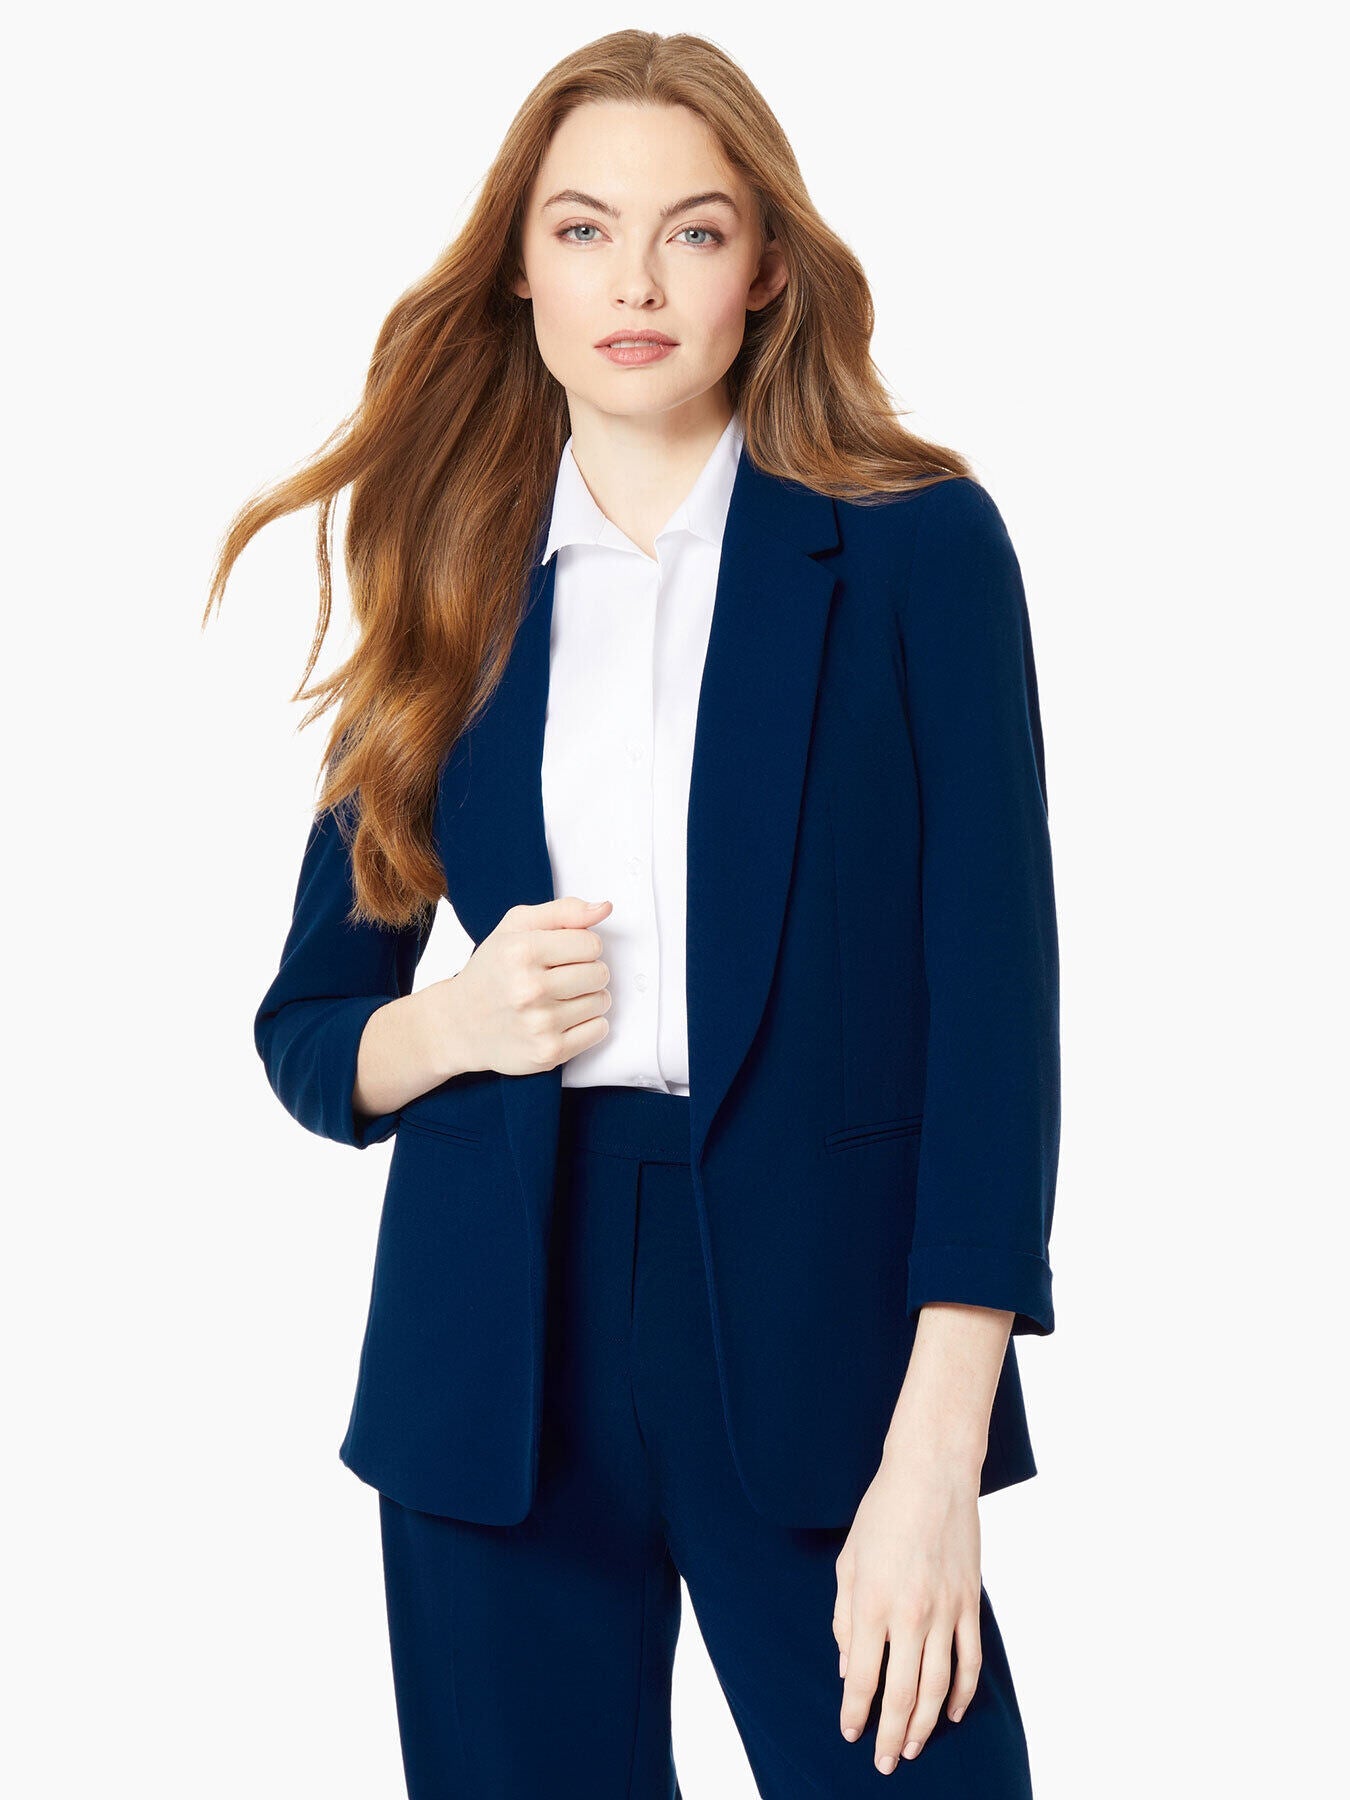 HSMQHJWE Womens Business Suits For Work Professional Womens Puffy